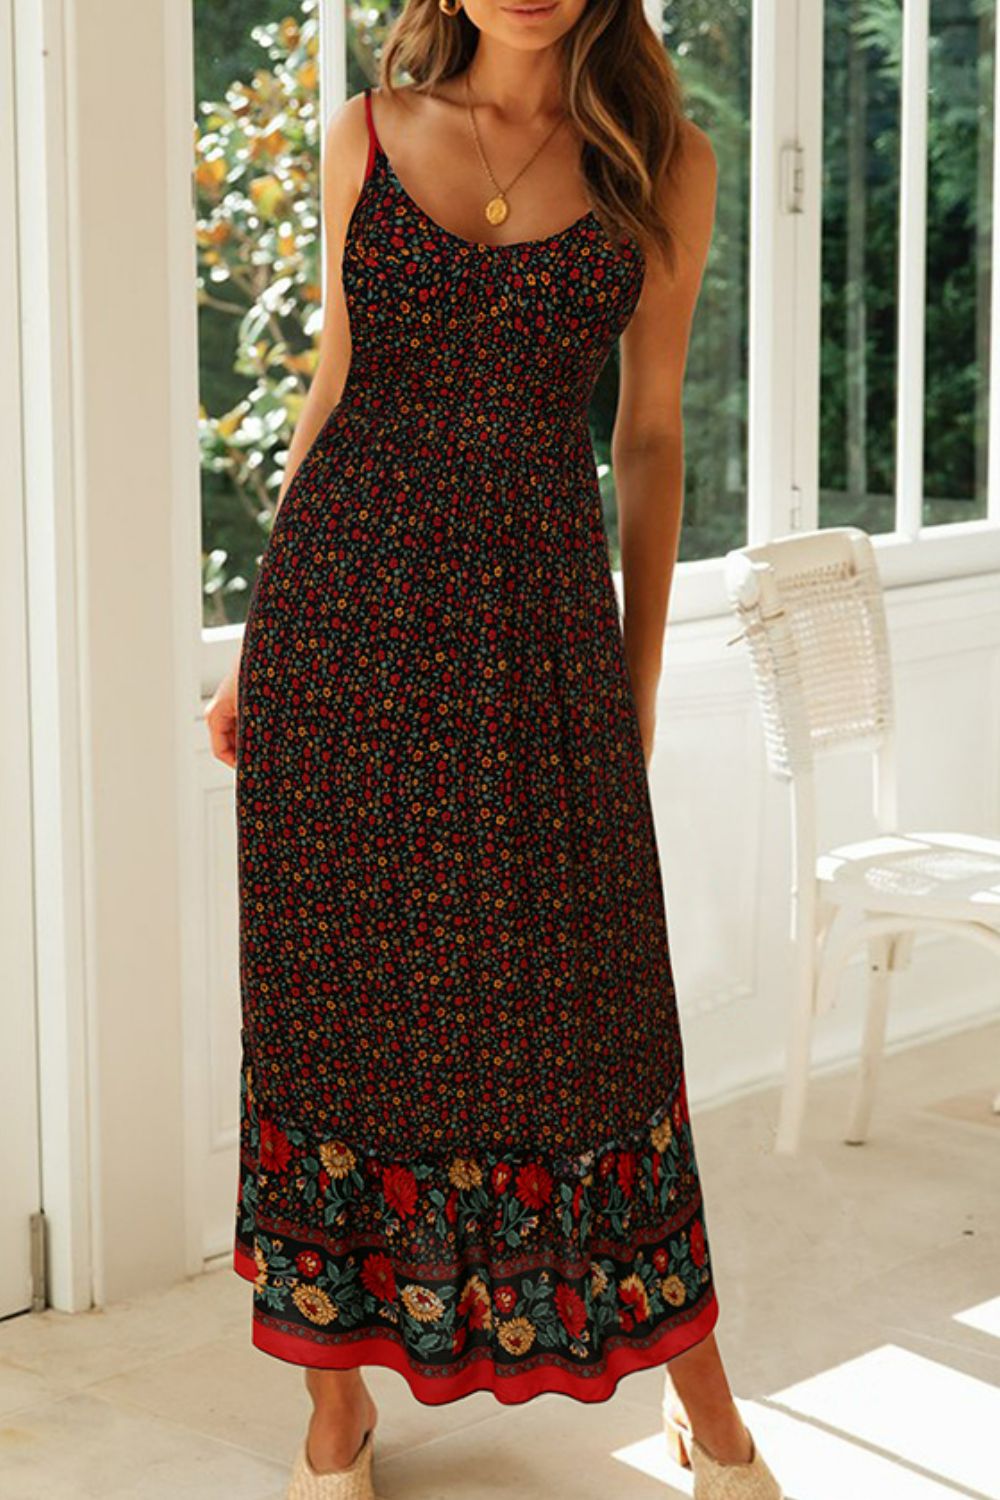 Bohemian Spaghetti Strap Summer Dress - black floral maxi dress with a v neck. #Firefly Lane Boutique1